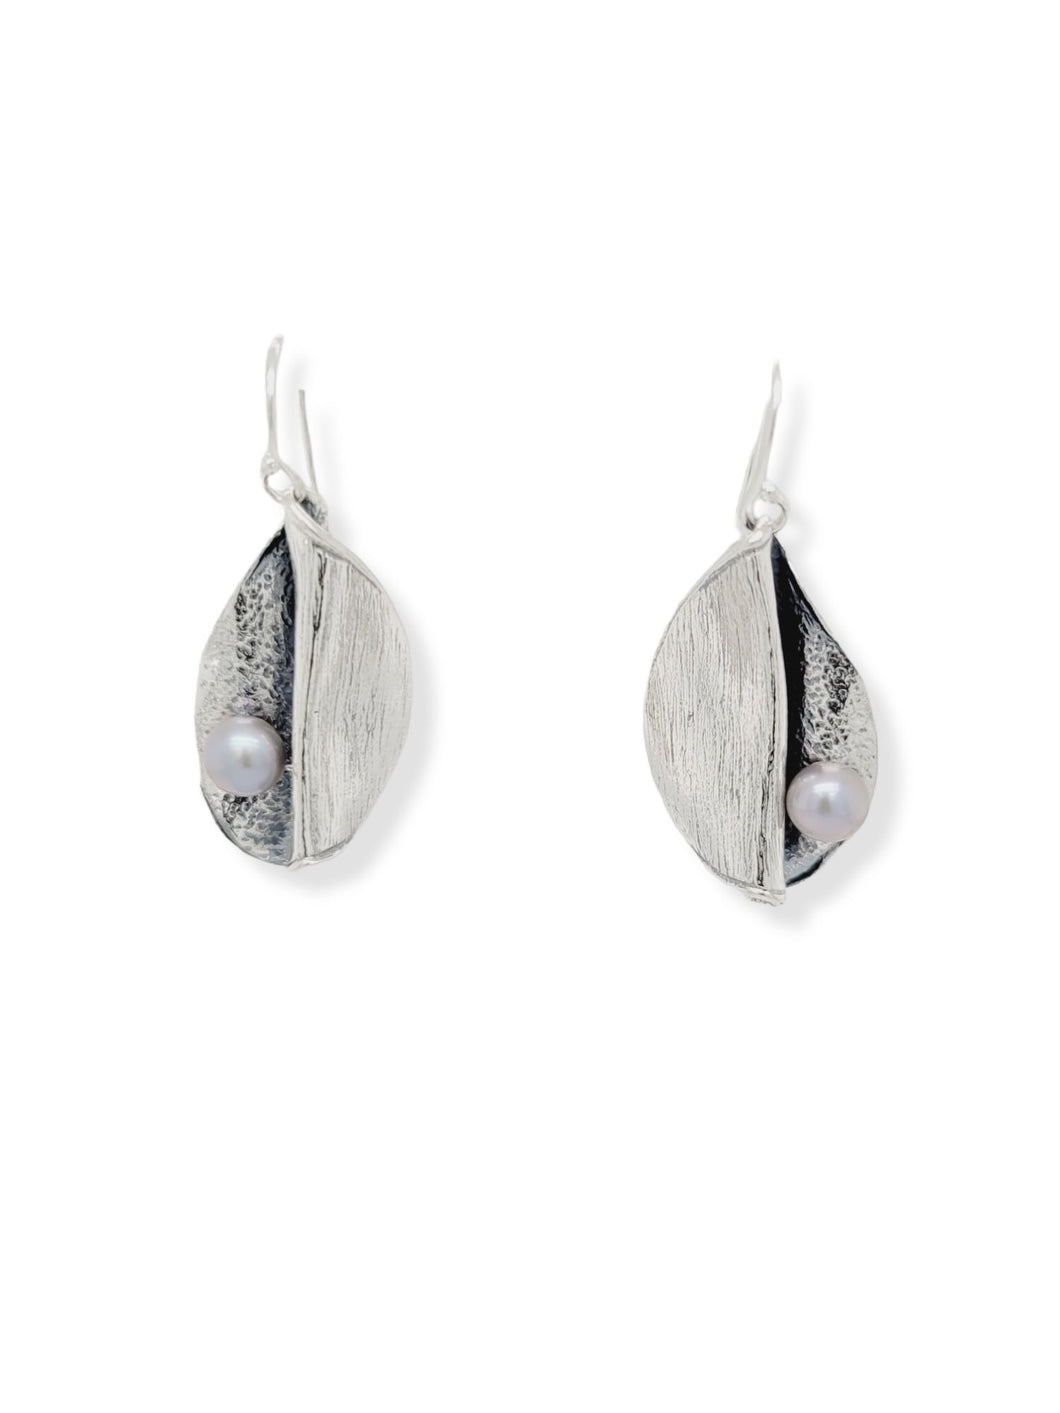 Grey Pearl and Folded Sterling Silver Earrings